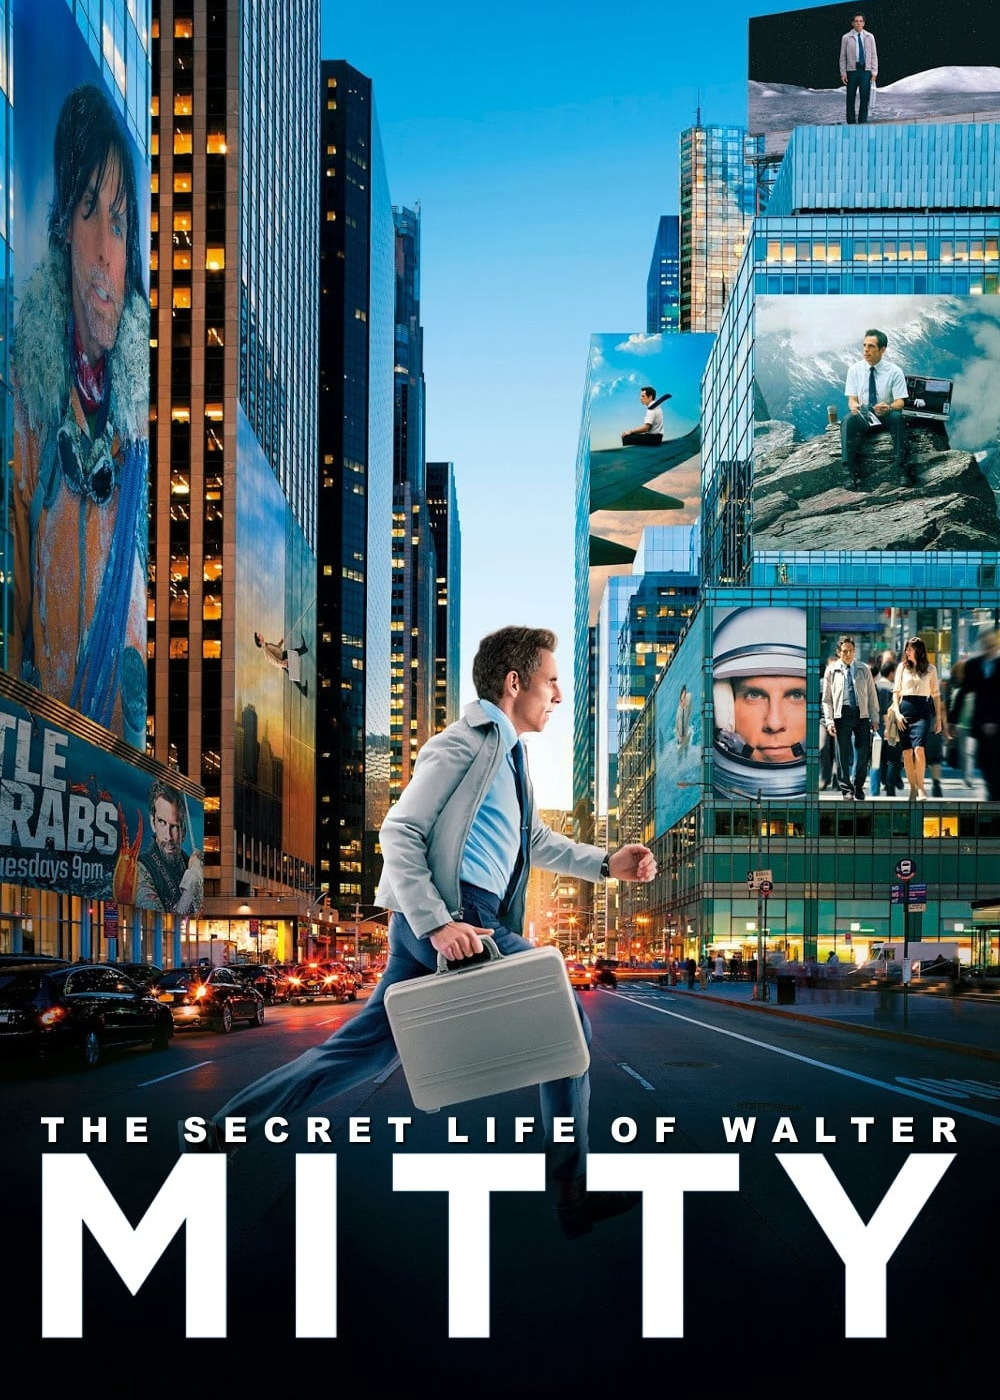 Poster Phim Bí Mật Của Walter Mitty (The Secret Life of Walter Mitty)